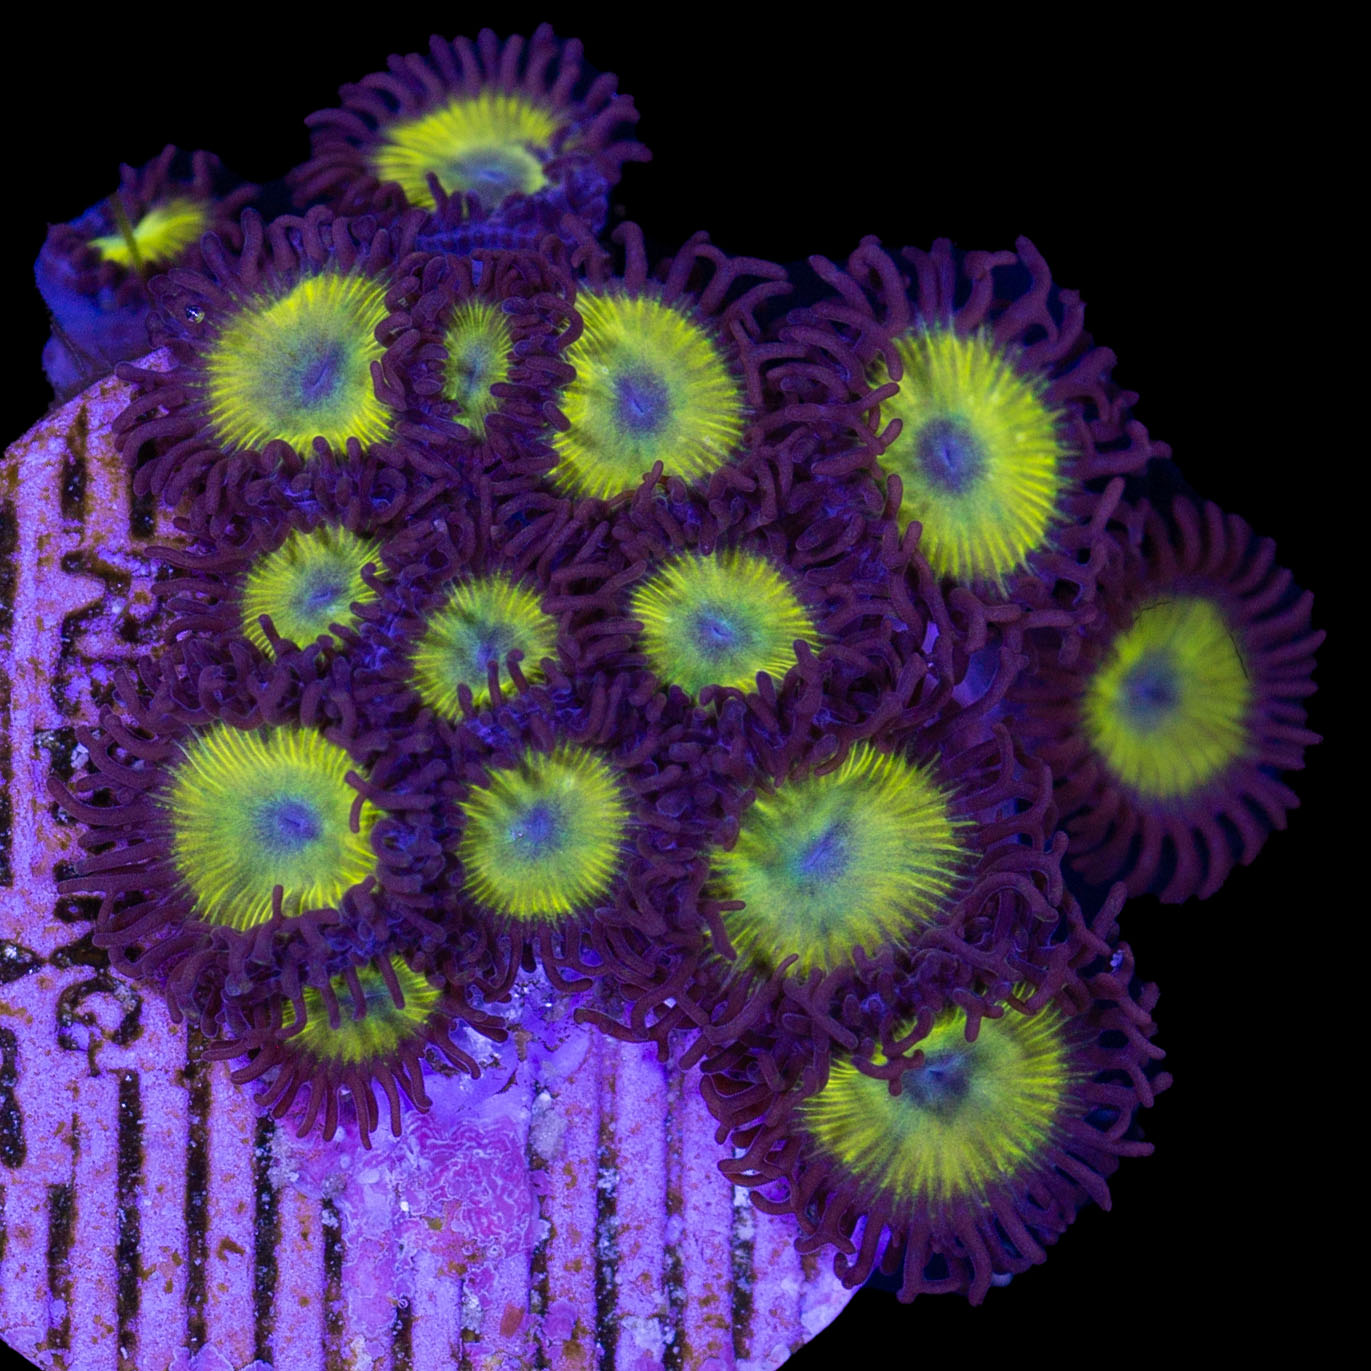 Vivid's Dragonfly Zoanthids